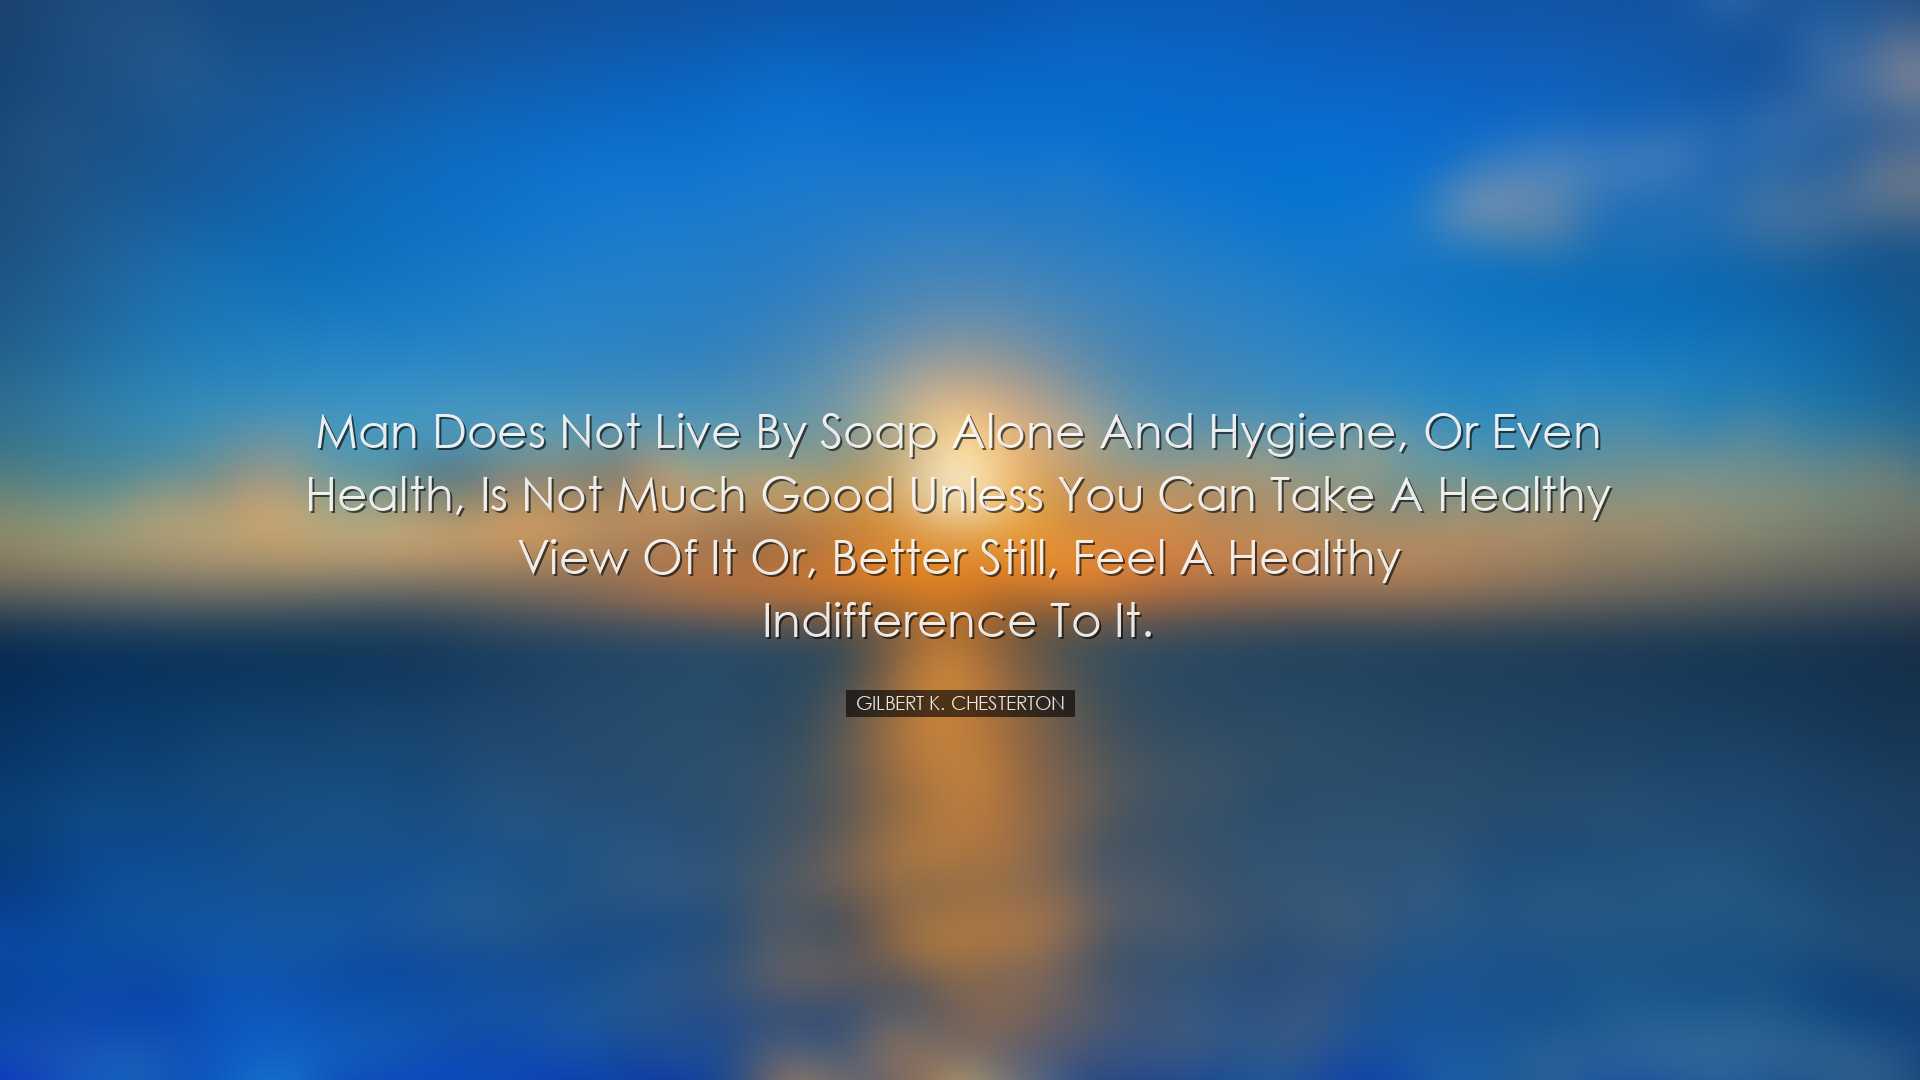 Man does not live by soap alone and hygiene, or even health, is no